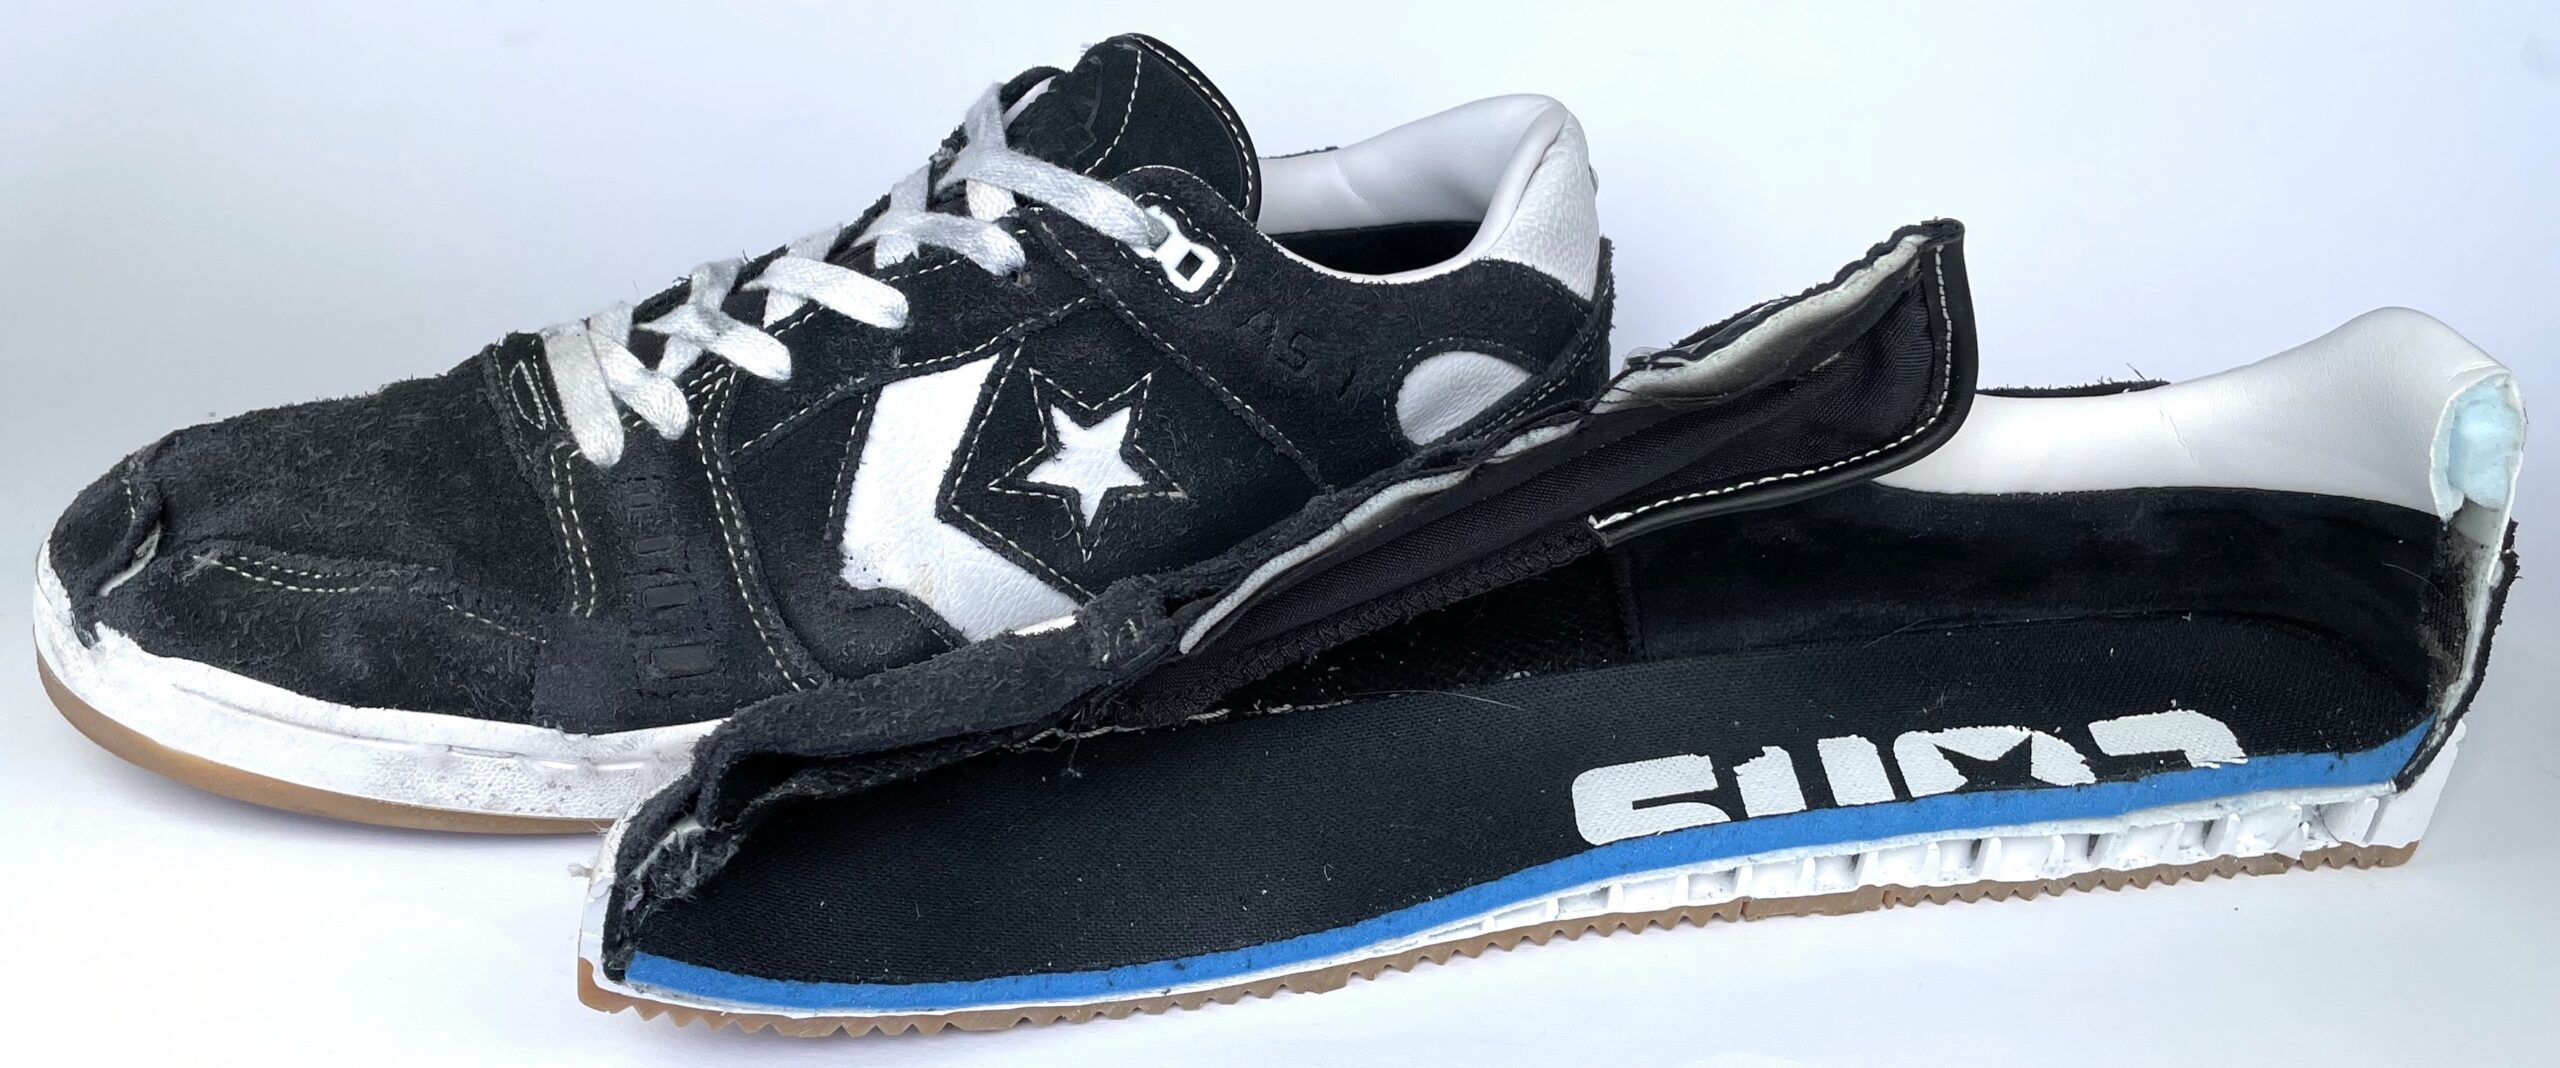 Converse AS-1 Pro - Weartested - detailed skate shoe reviews